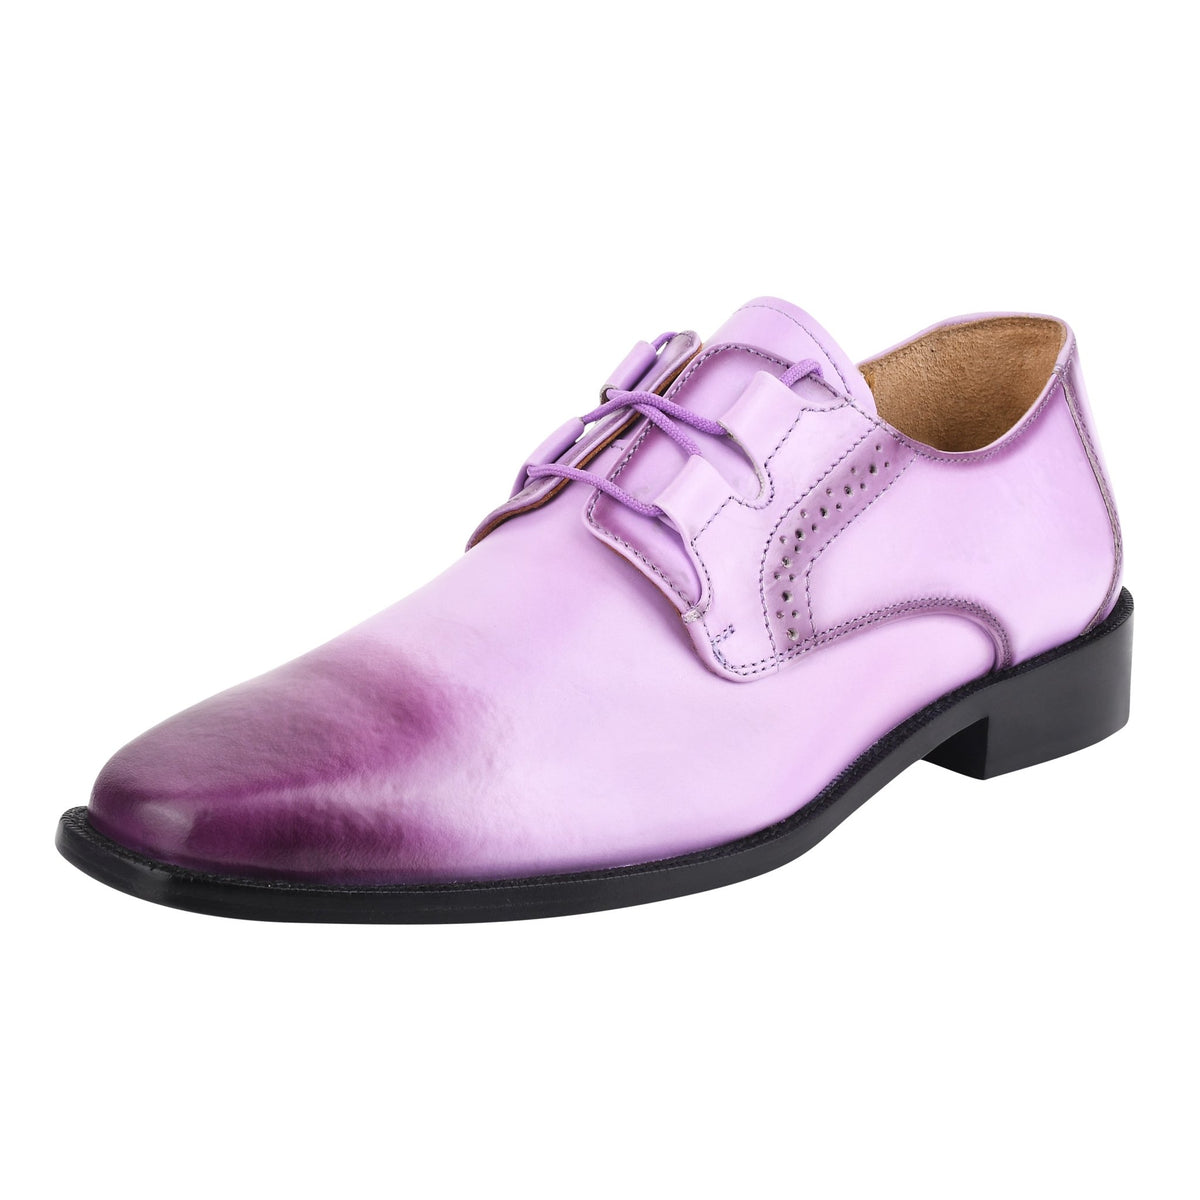 Barbara Genuine Leather Oxford Dress Shoes for Men in Lilac and Olive ...